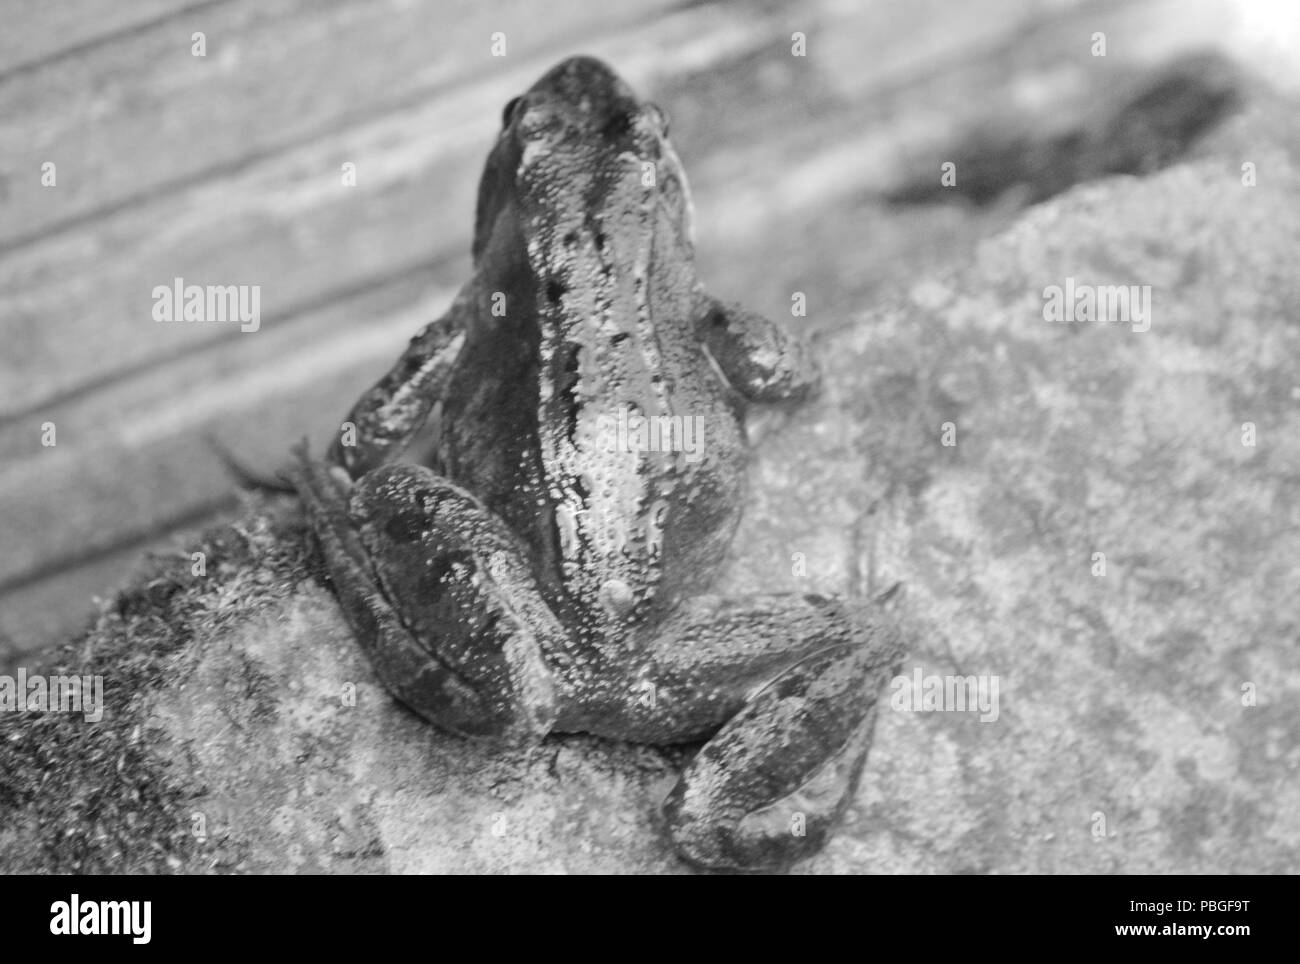 Frog in black and white Stock Photo